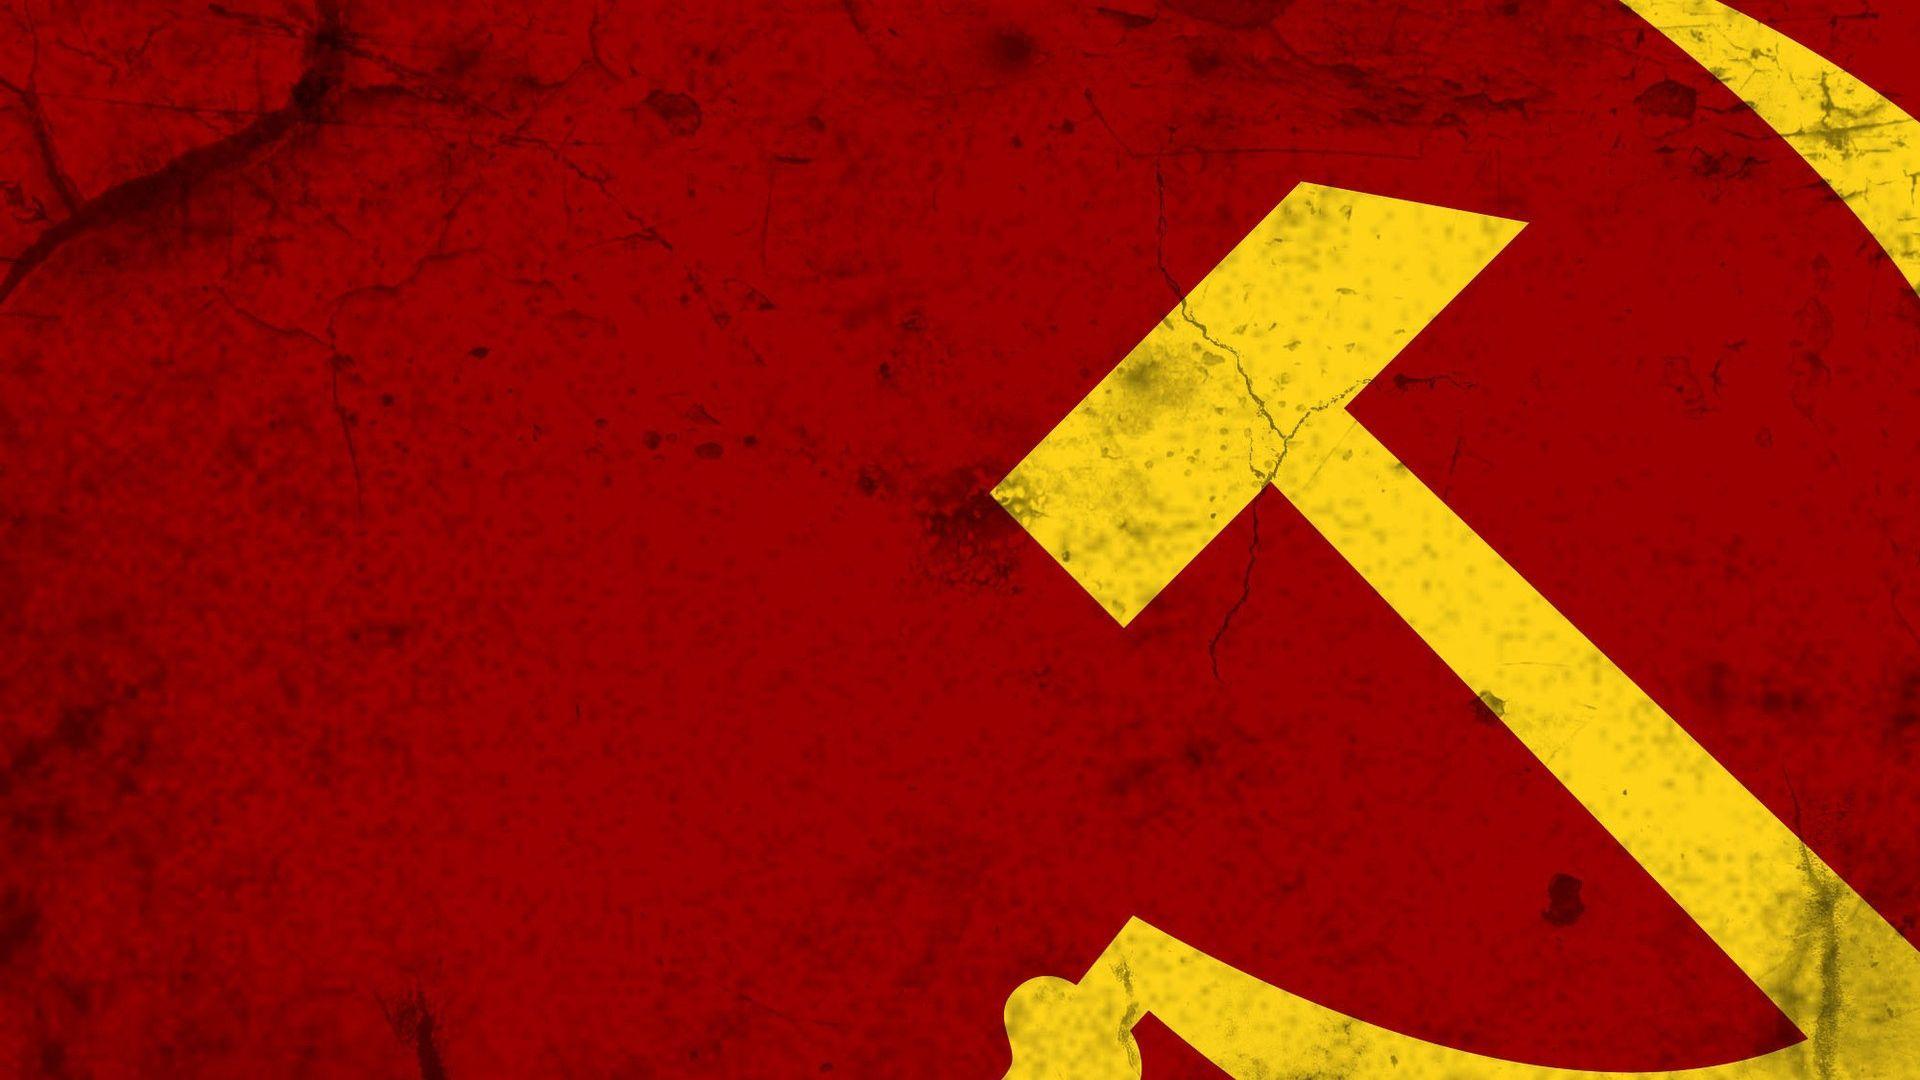 Download wallpaper 1920x1080 hammer and sickle, soviet union, russia